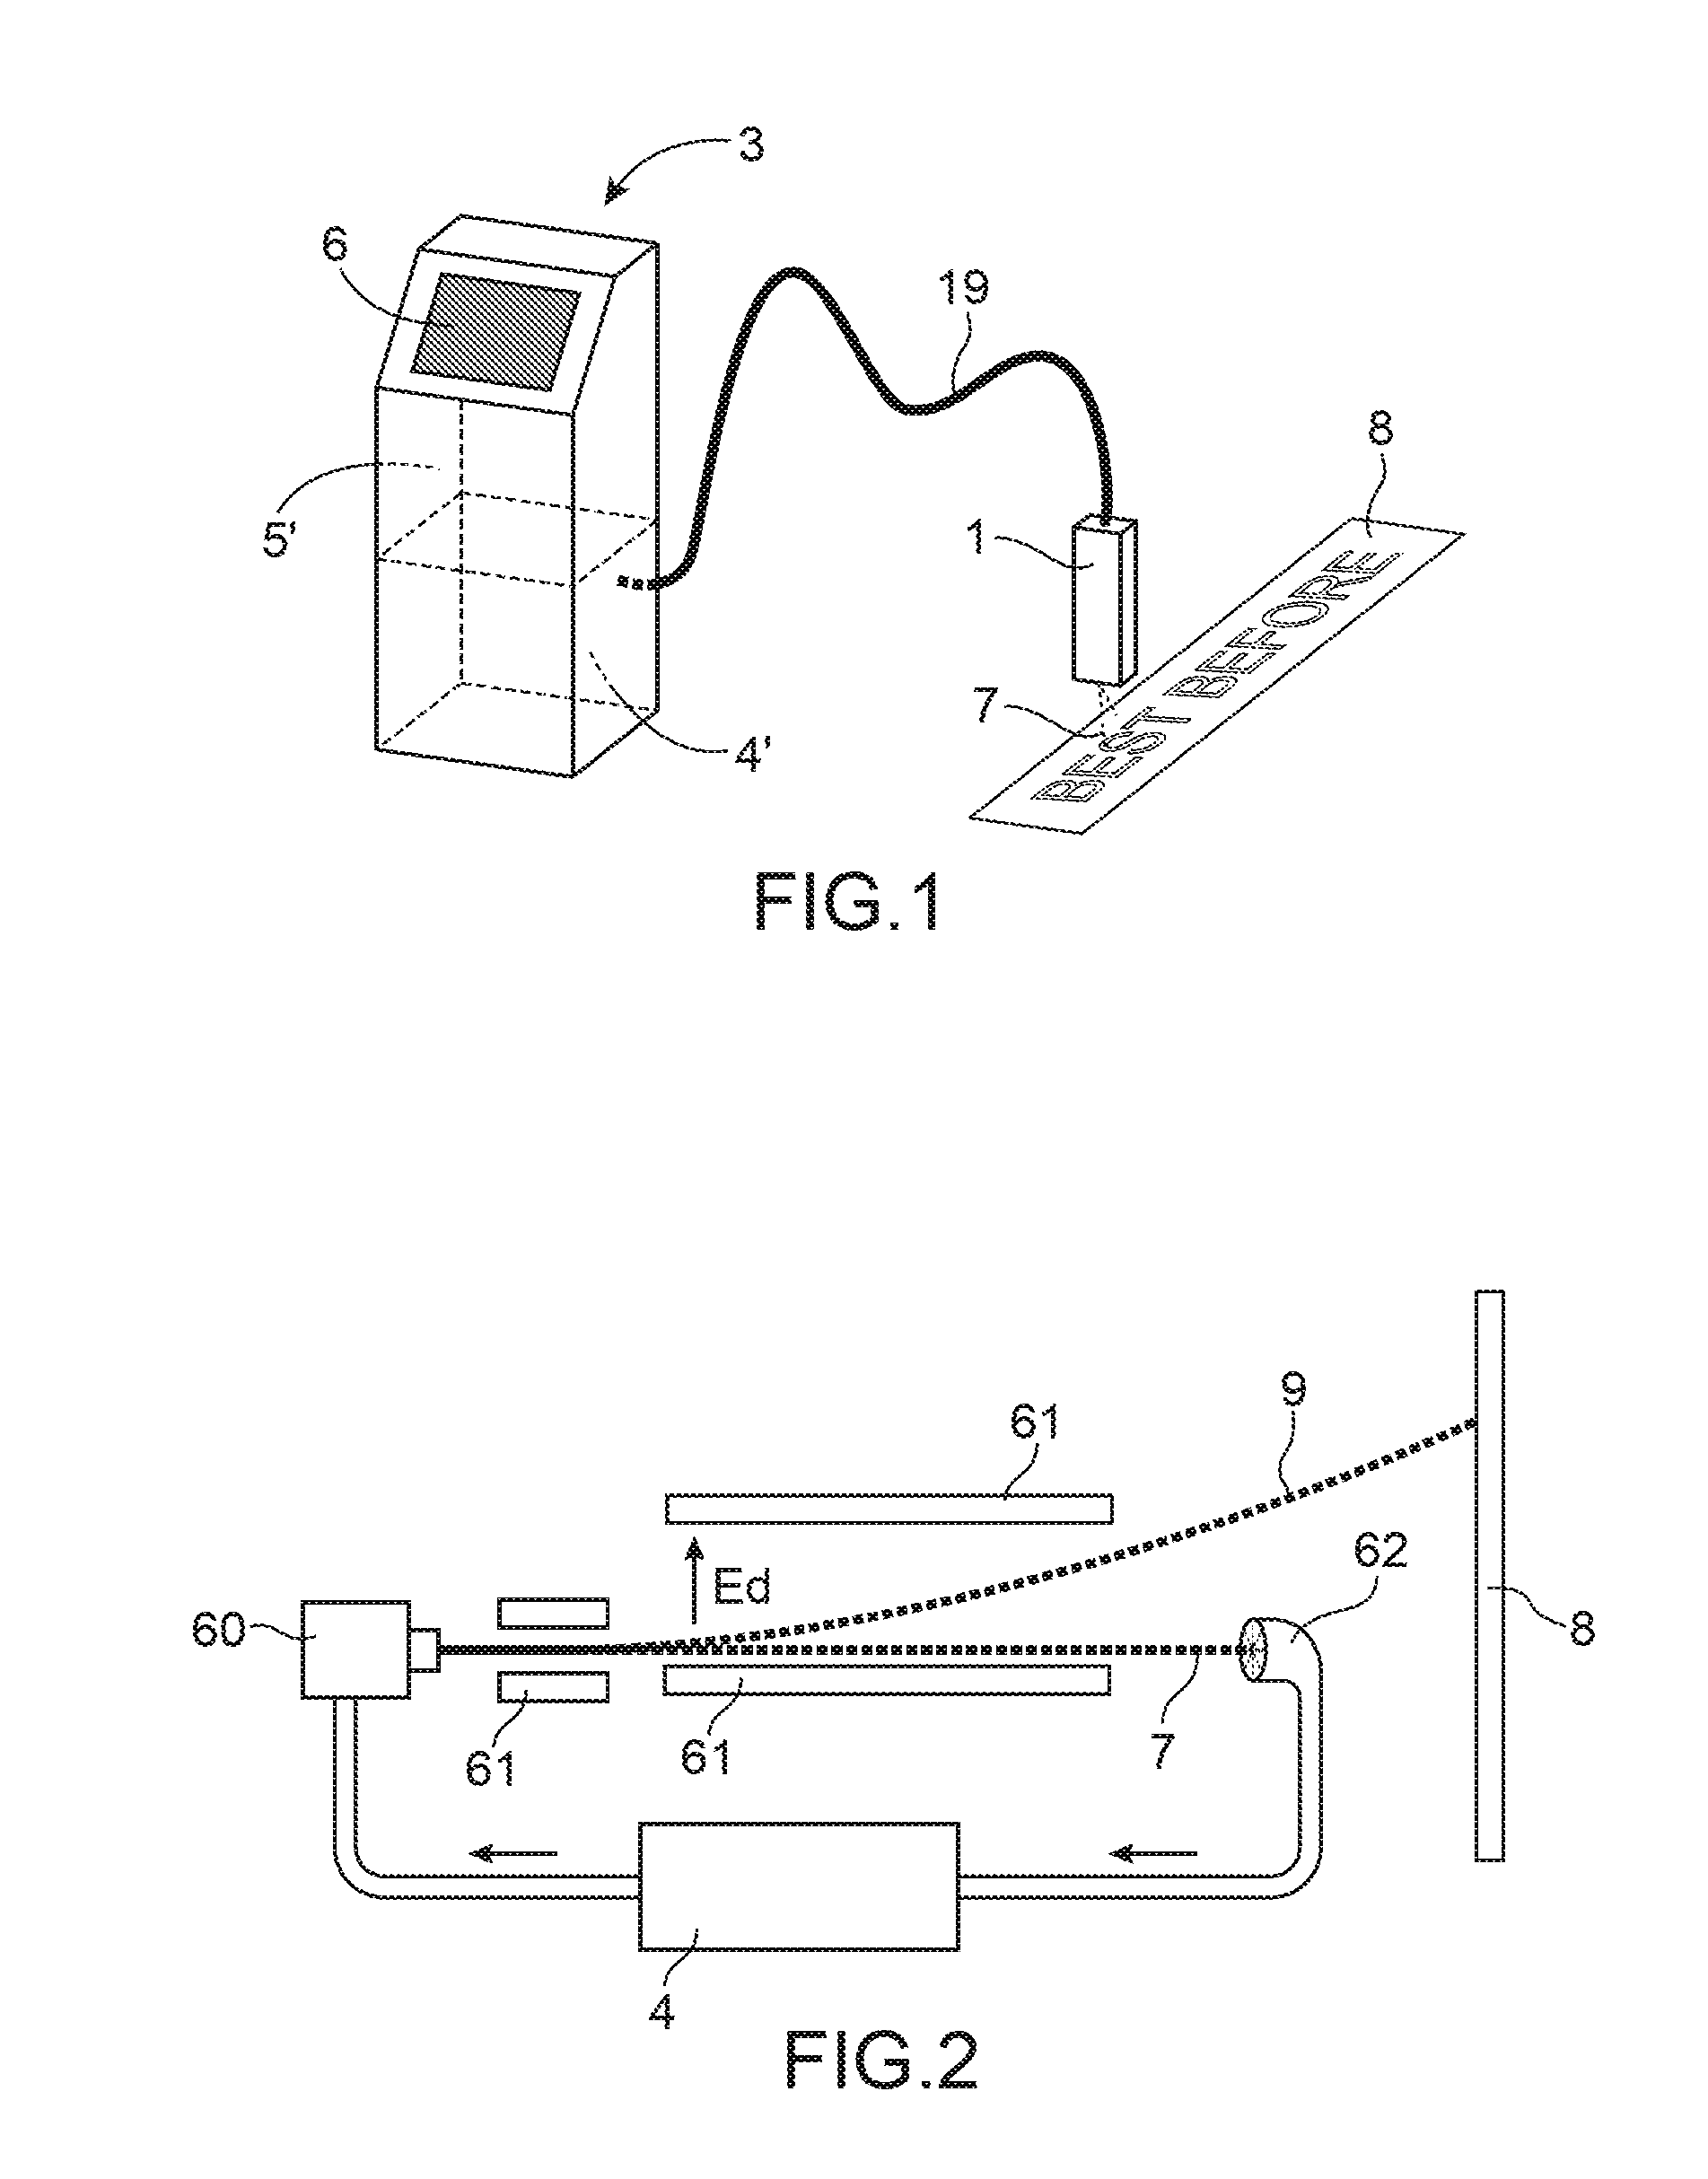 Method and device for partial maintenance of a hydraulic circuit